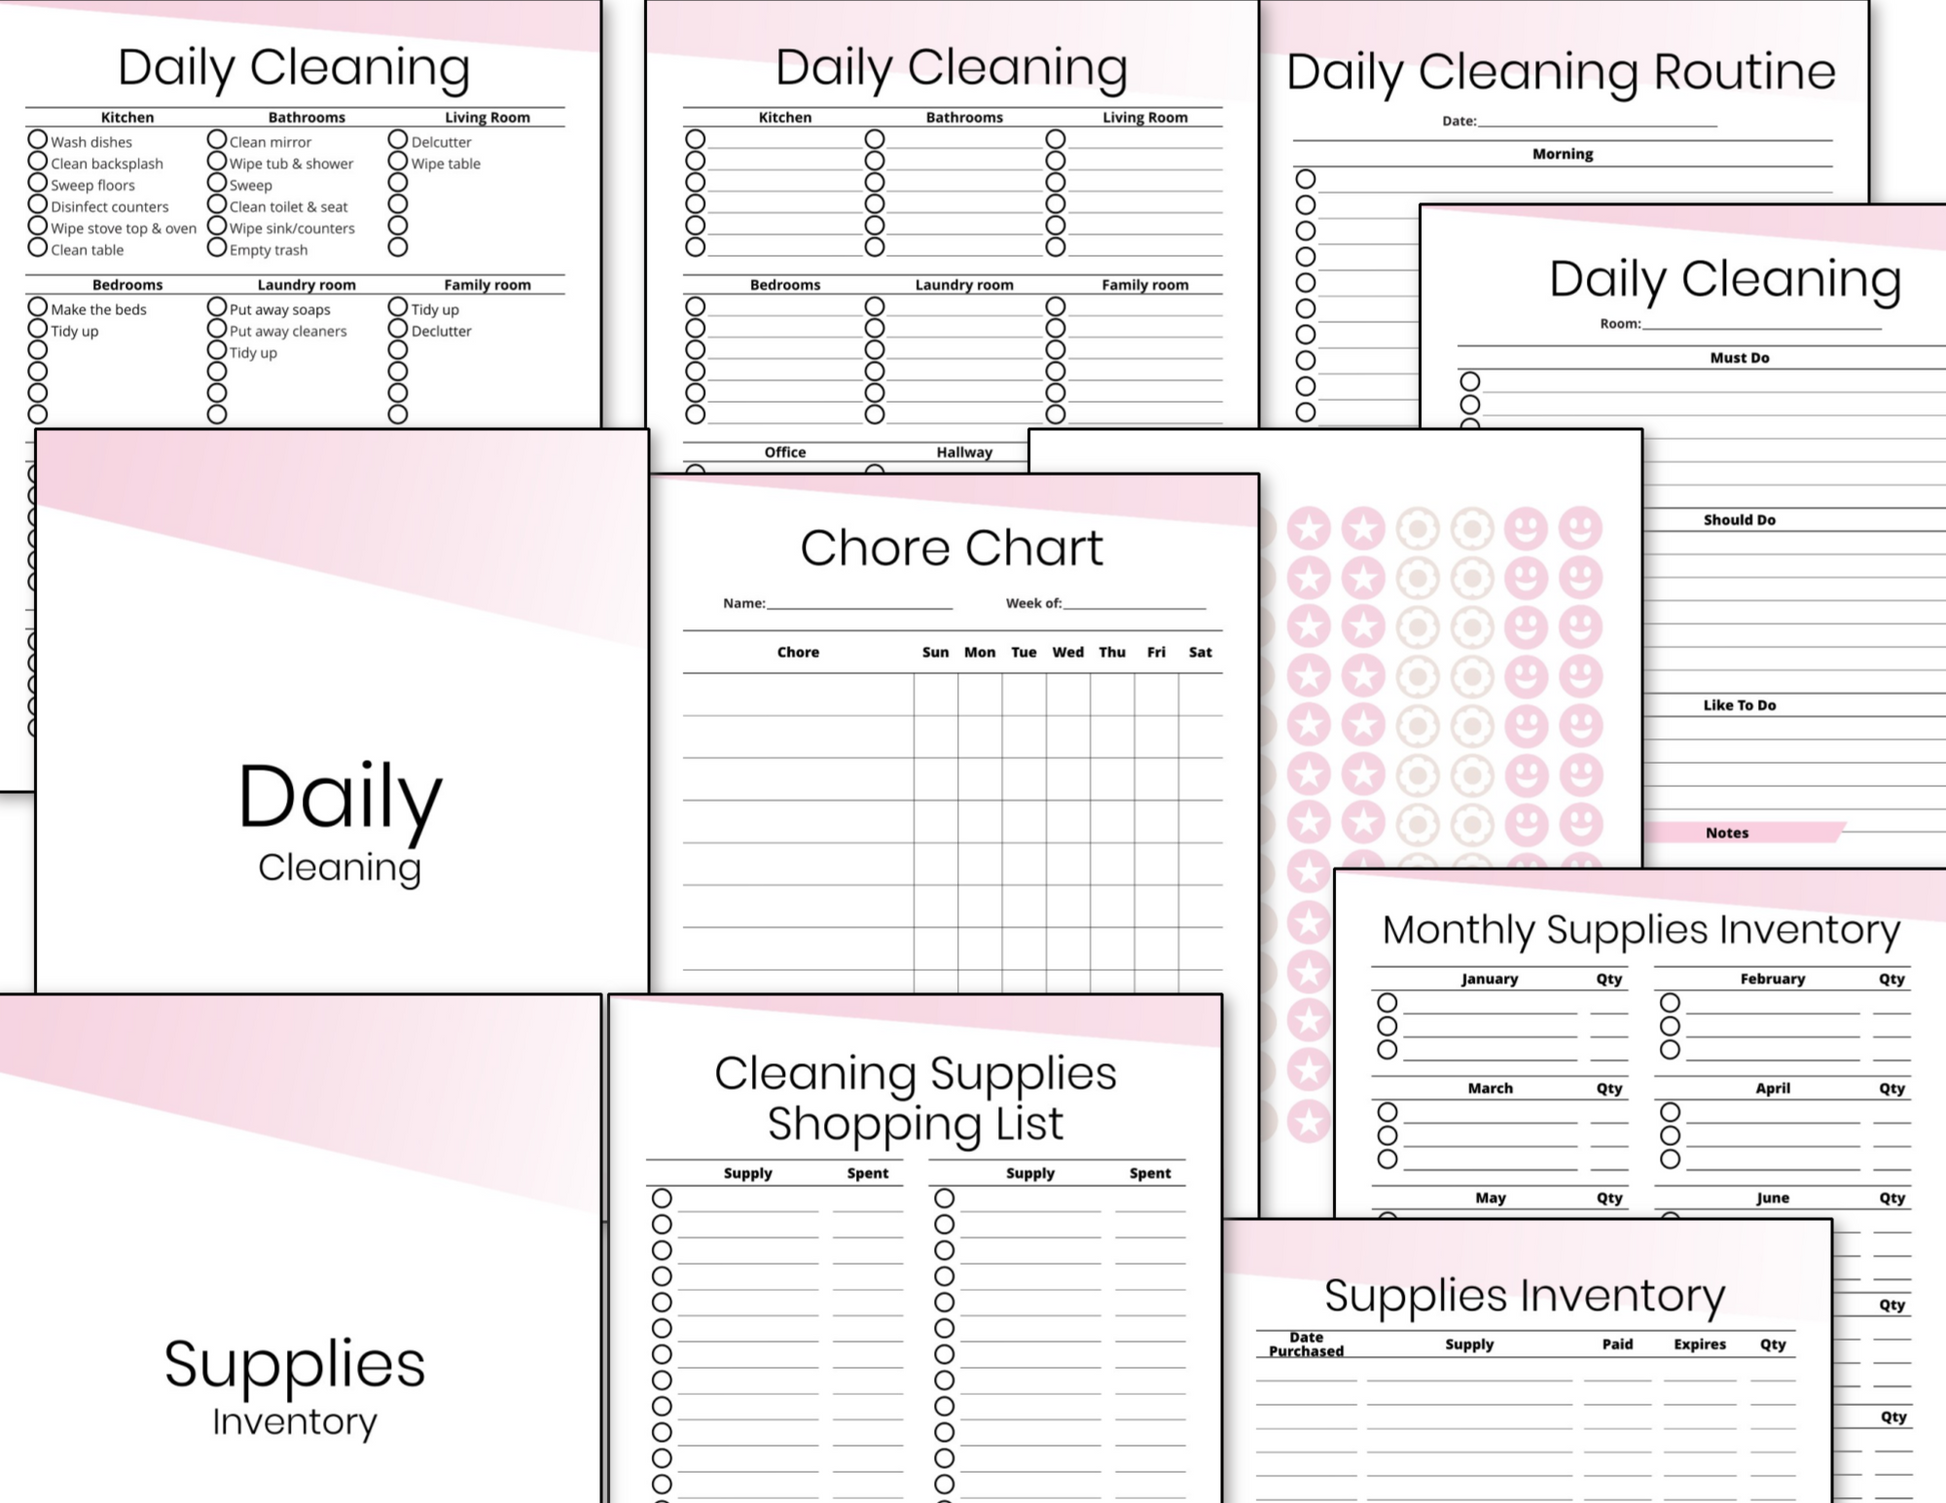 Daily Cleaning Checklist Printable - Cleaning Binder Fillable in Pink from the Organized 31 Shop.